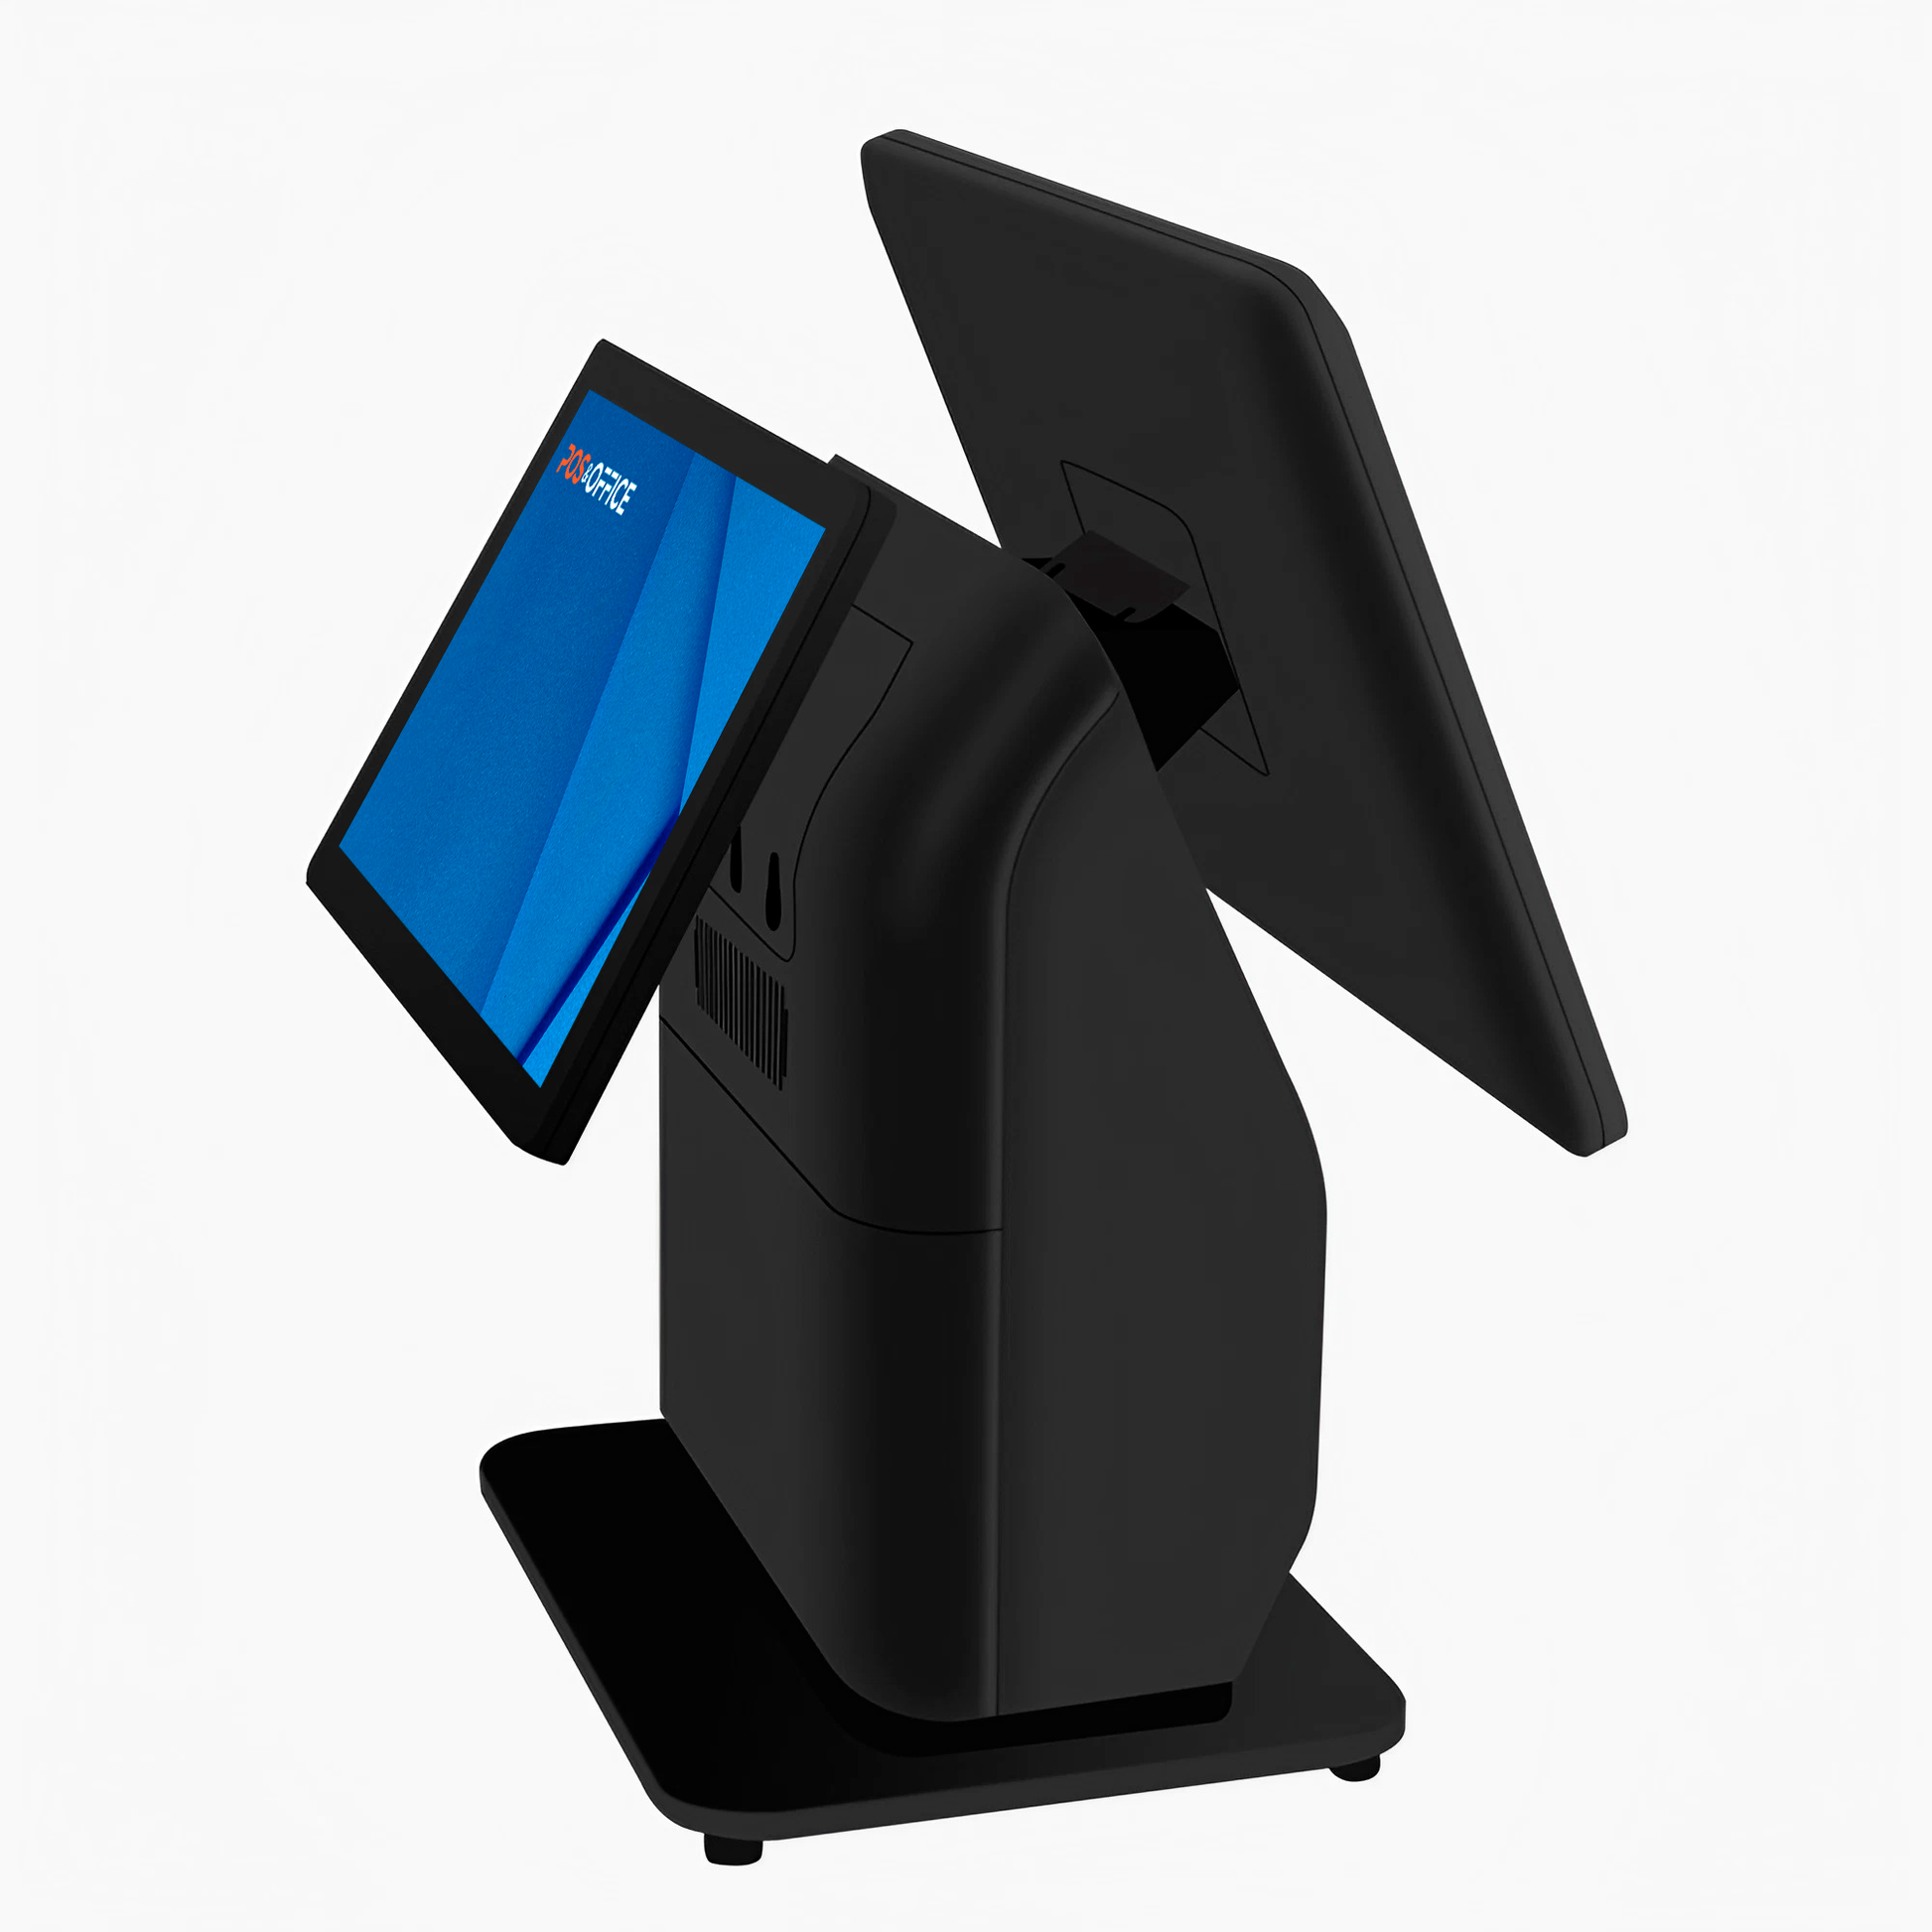 AI230, Android, Windows, all in one, all in one terminal, android POS, Windows POS, terminal de punto de venta, automação comercial, AIO, POS, PDV, all in one terminal, terminal de ponto de venda